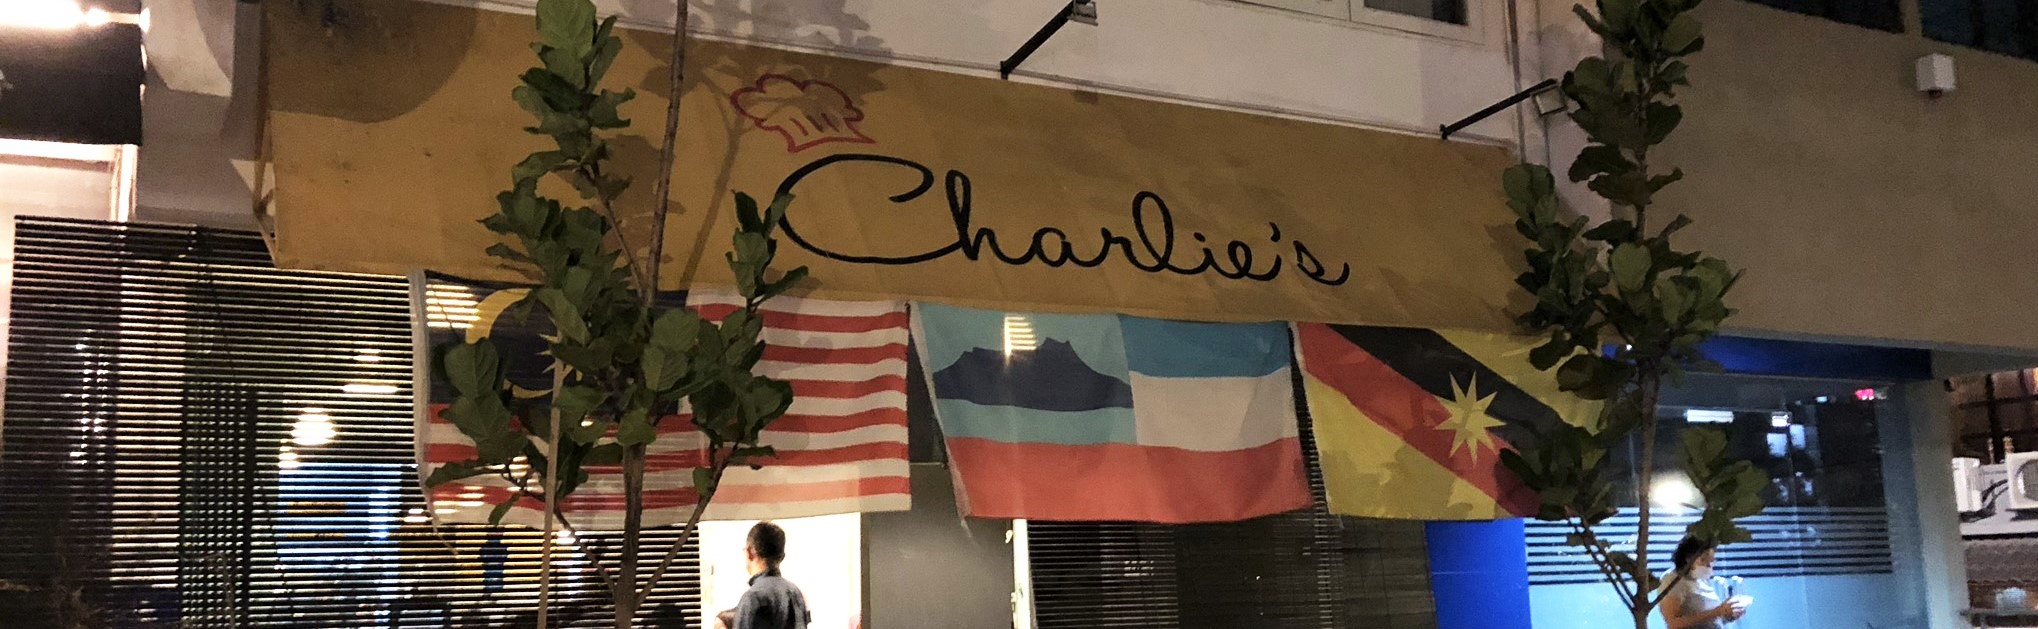  At Charlie's Cafe, enjoy tasty Malaysian fare that pays it forward. Photo by Victoria Ong